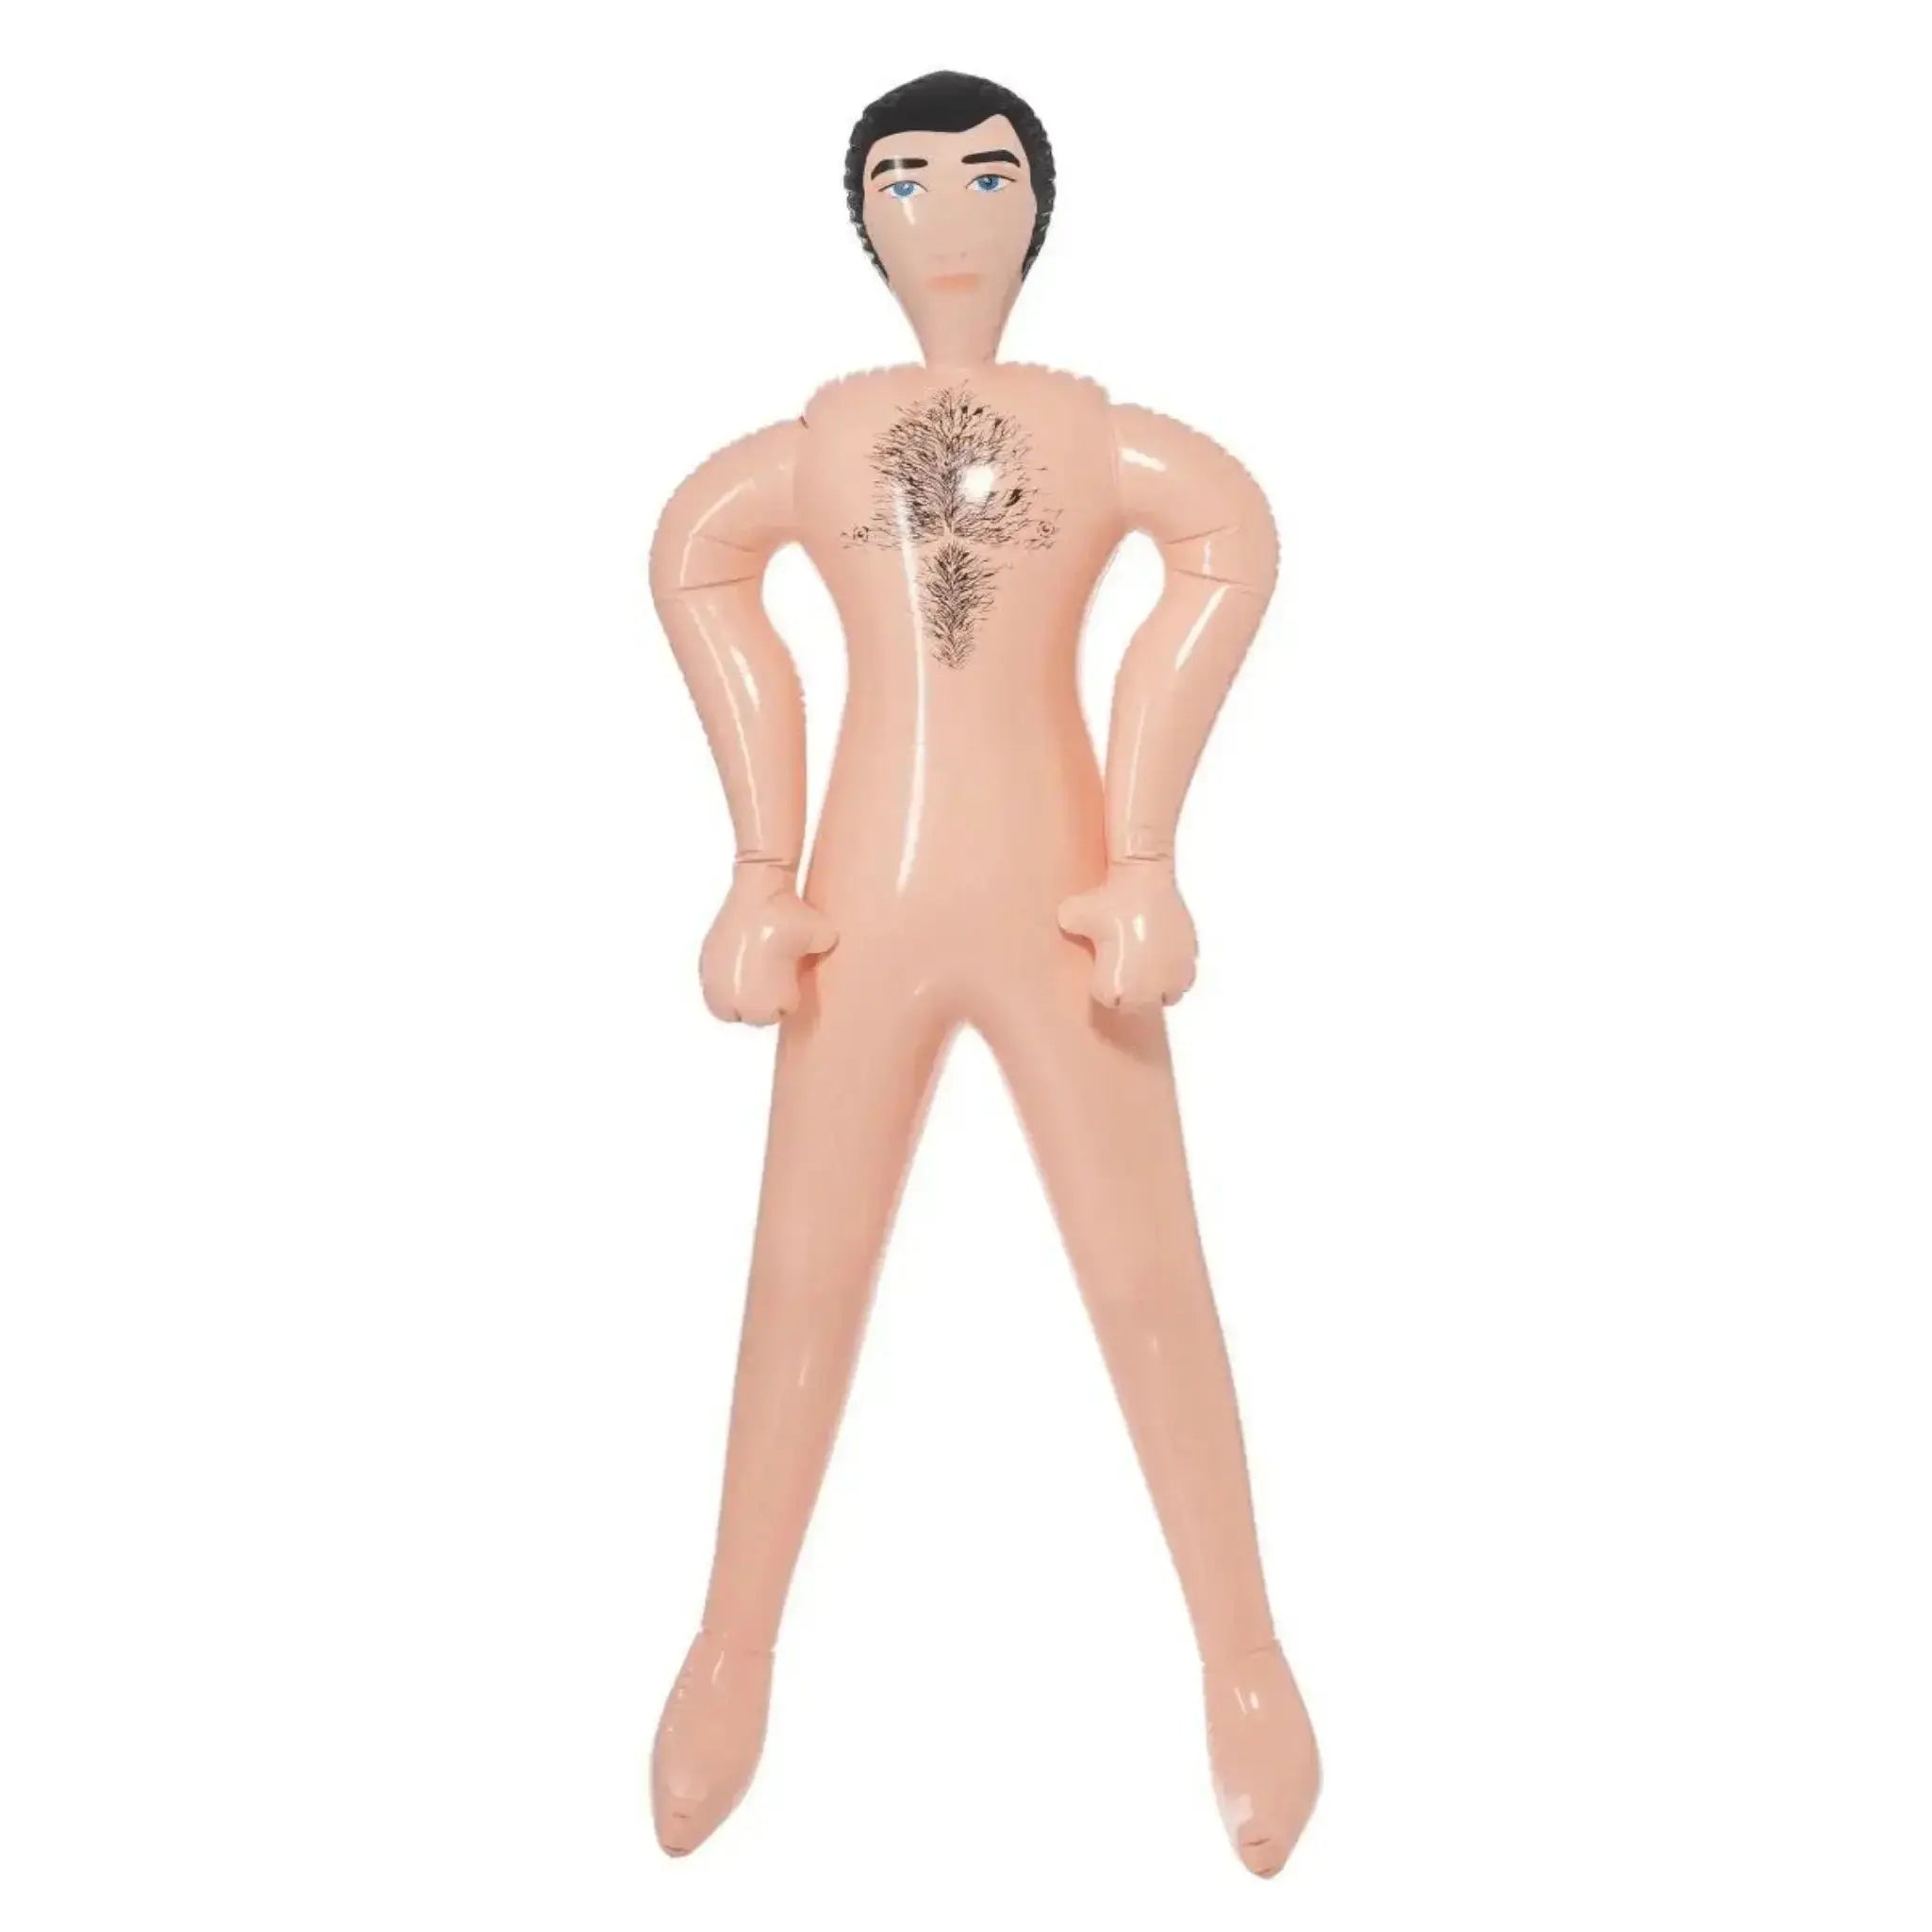 Inflatable Blow-Up Doll, Male | The Party Hut